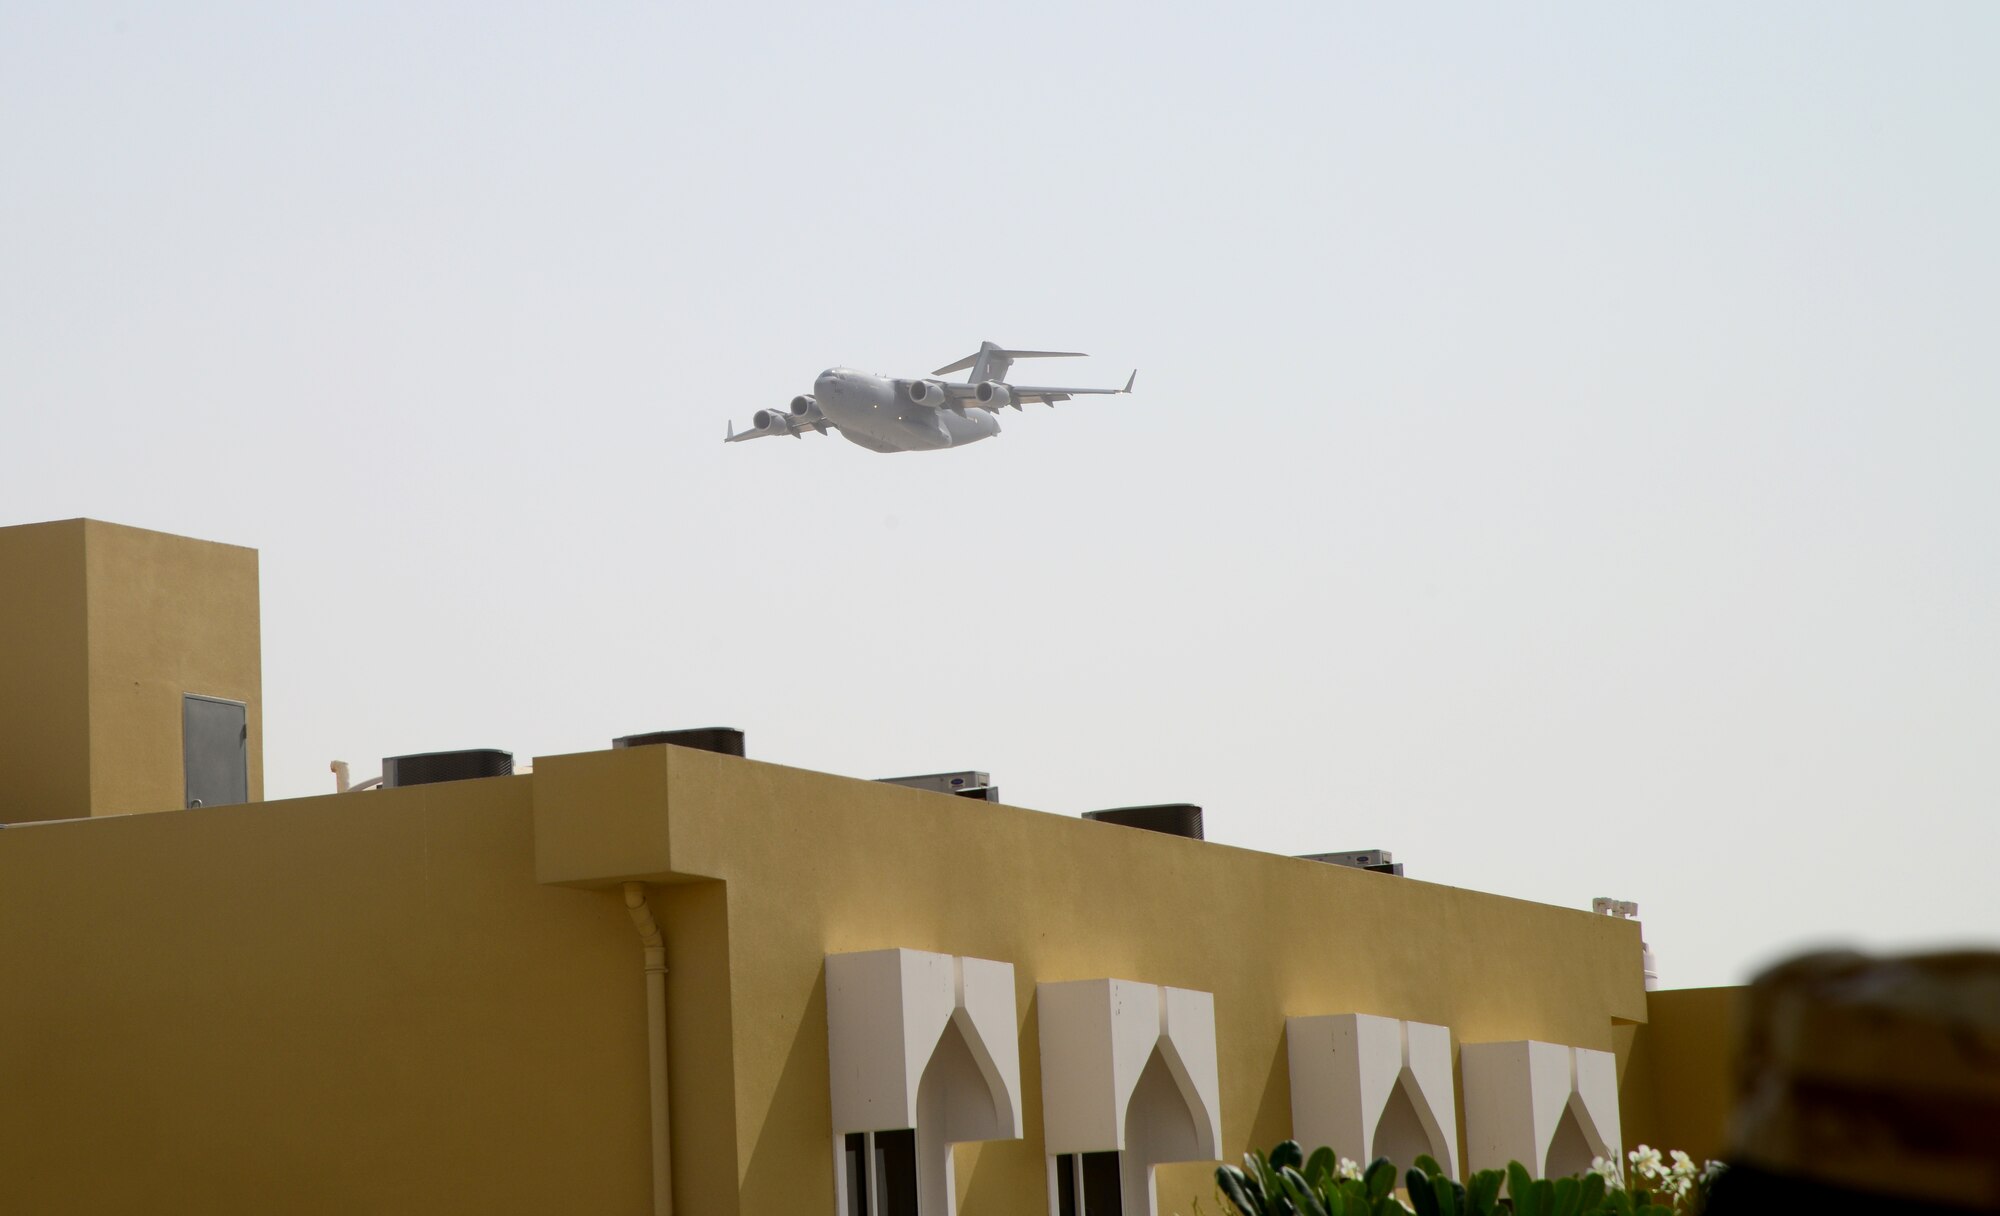 A C-17 Globemaster III performs a fly over during the Qatar Emiri Air Force’s Air Lift Wing’s C-17 5th year anniversary ceremony Nov. 7, 2014, at Al Udeid Air Base, Qatar. The C-17 is the flagship to Qatar Emiri Air Force. During the ceremony, four firefighters from the 379th Expeditionary Civil Engineer Squadron received certificates for their part in putting out a C-17 fire on Sept. 6, here. (U.S. Air Force photo by Senior Airman Kia Atkins)